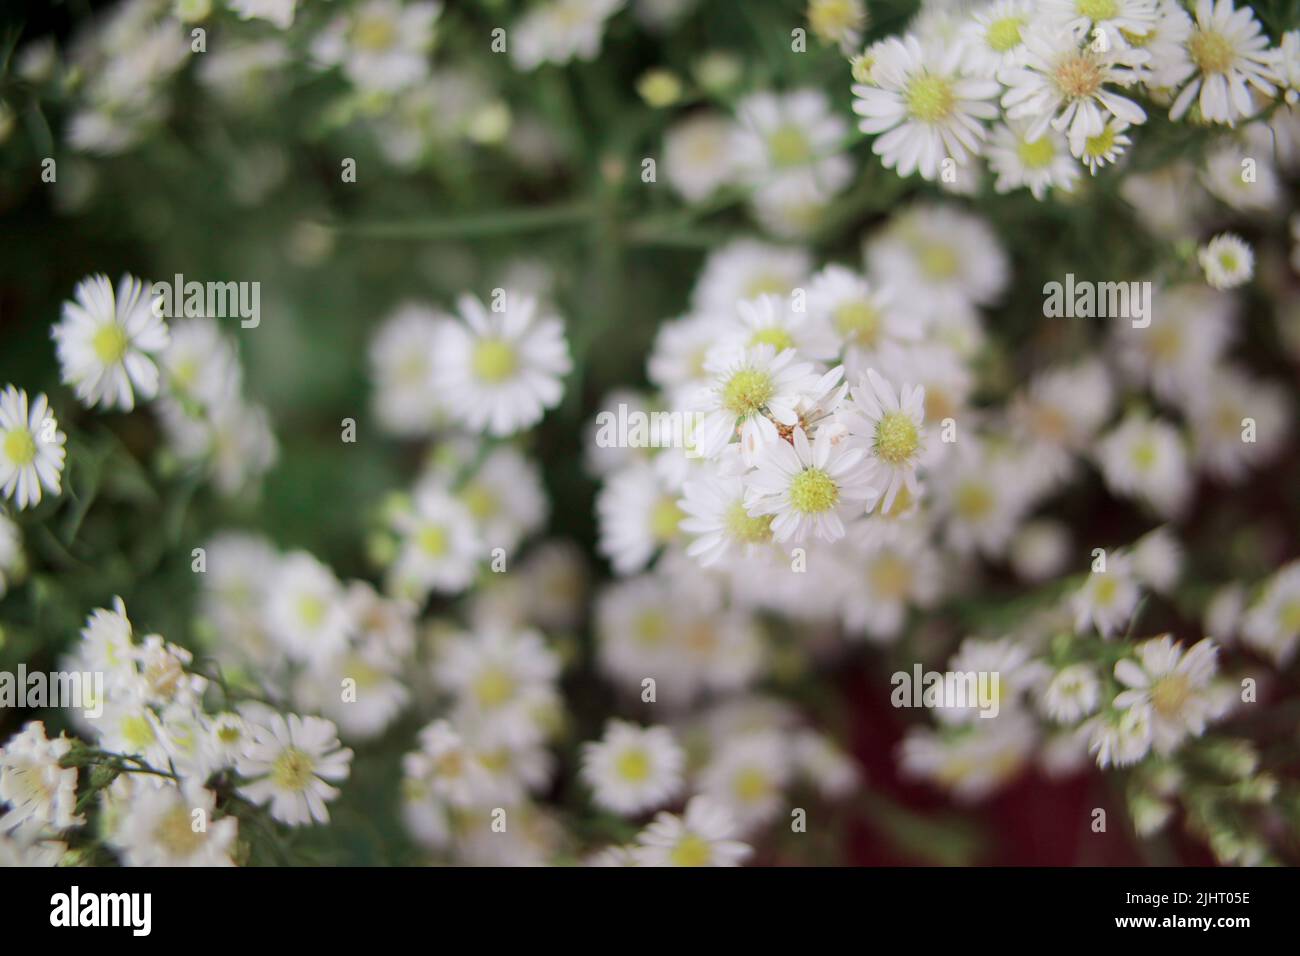 A selective focus shot of small white aster flowers Stock Photo